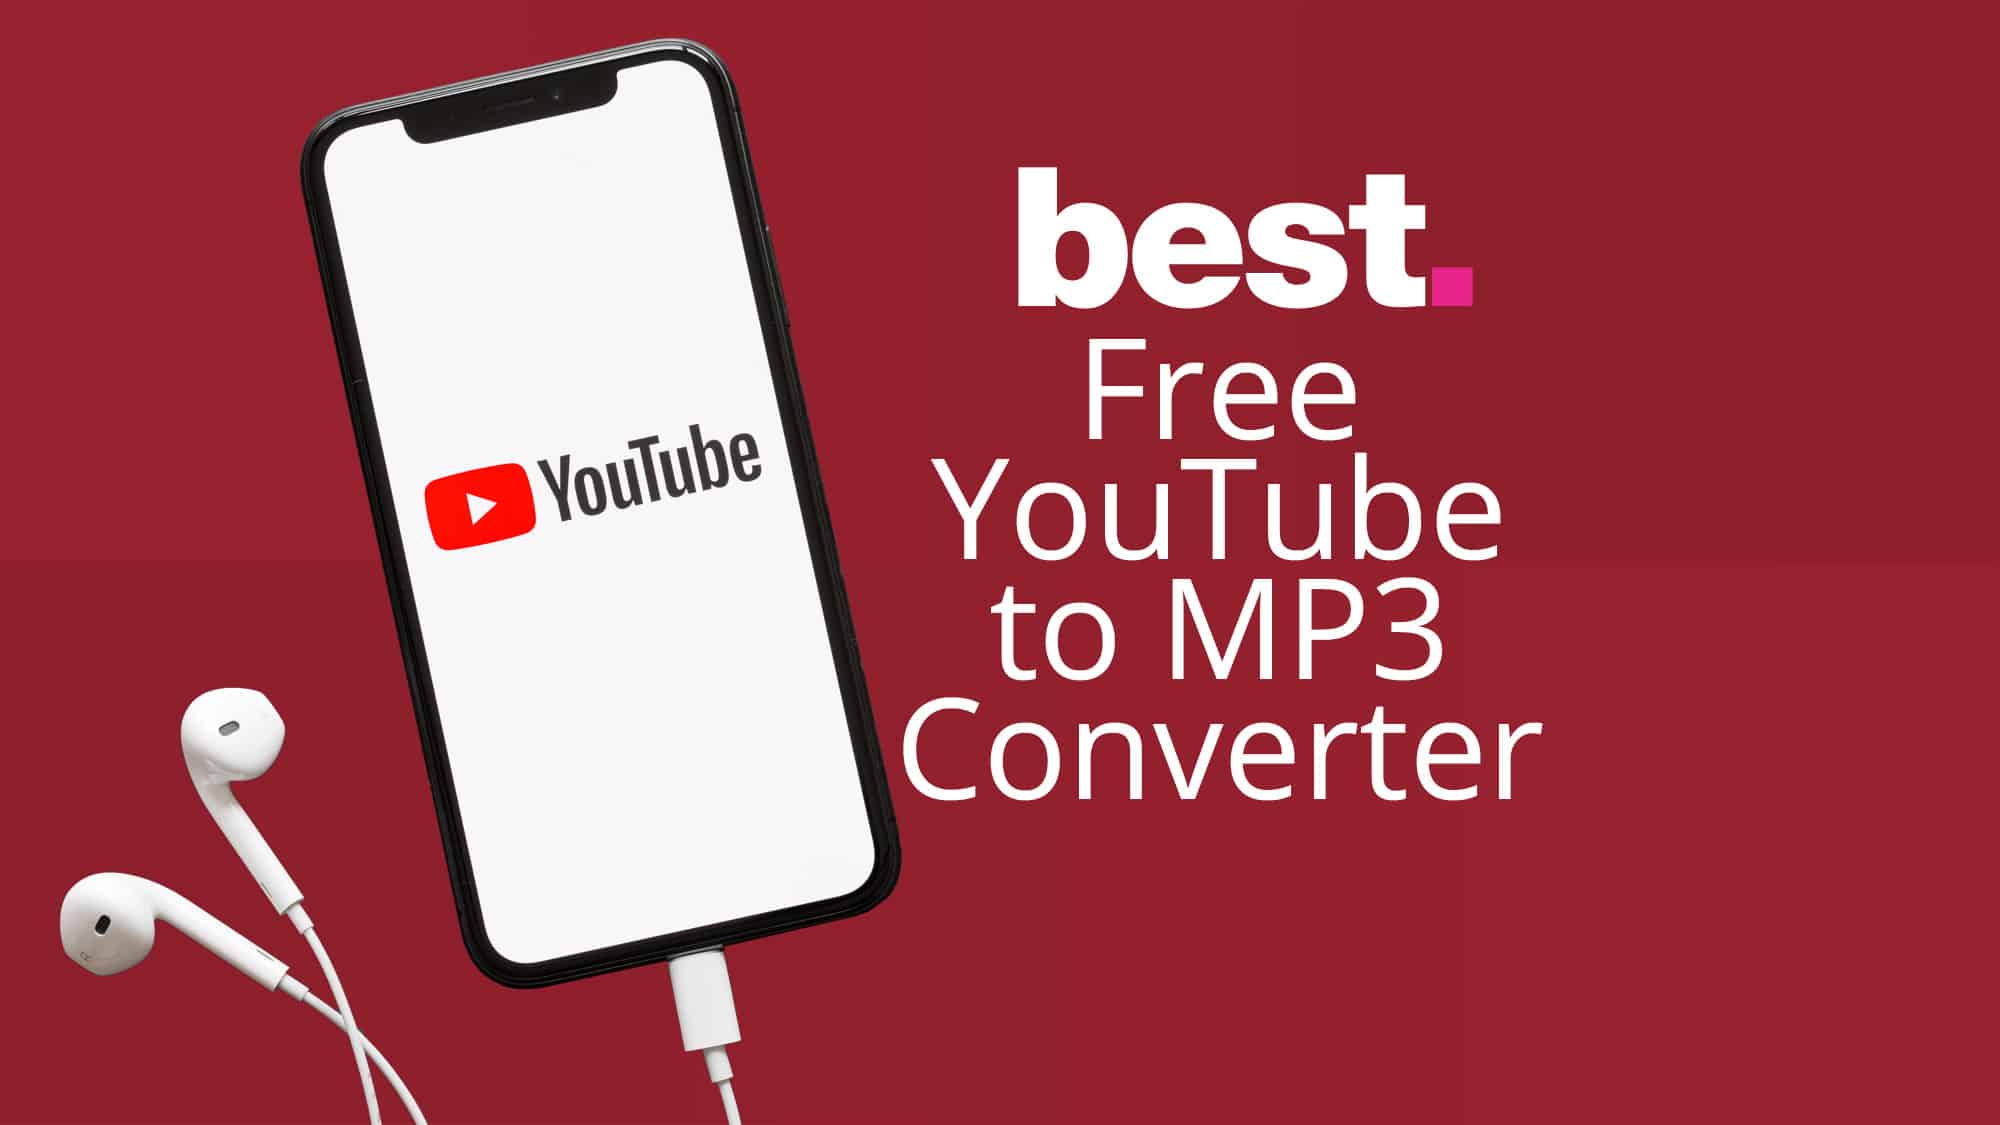 The Best YouTube Converters